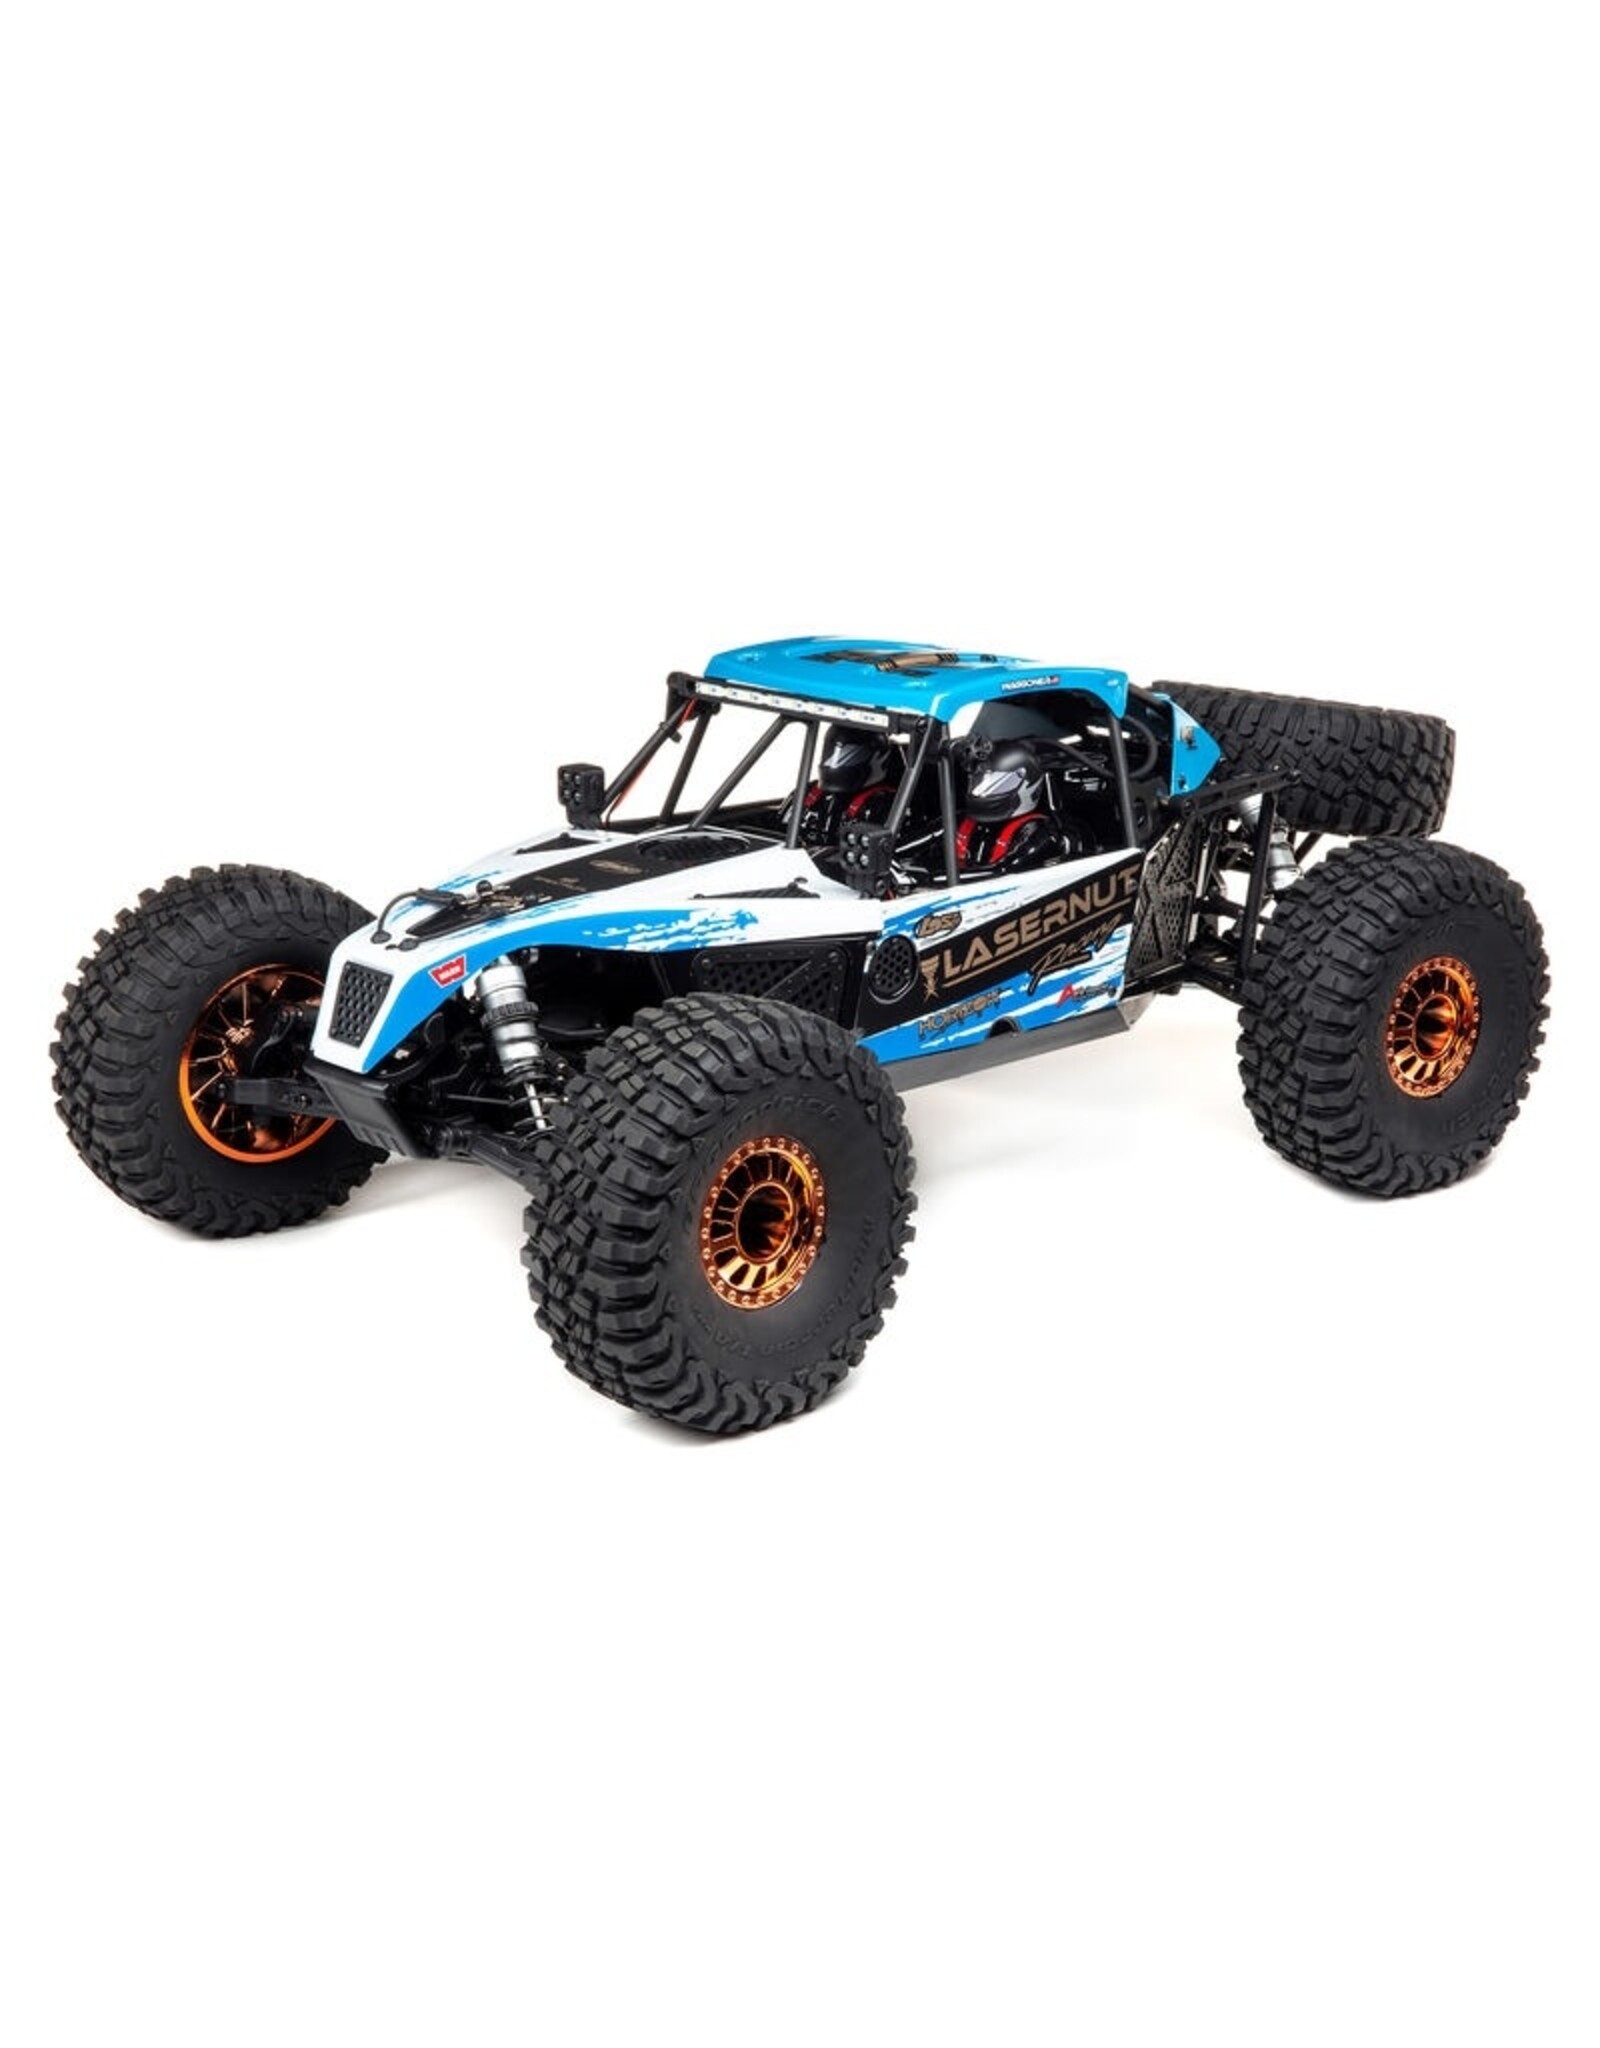 Losi LOS03028T1 1/10 Lasernut U4 4WD Brushless RTR with Smart ESC, Blue